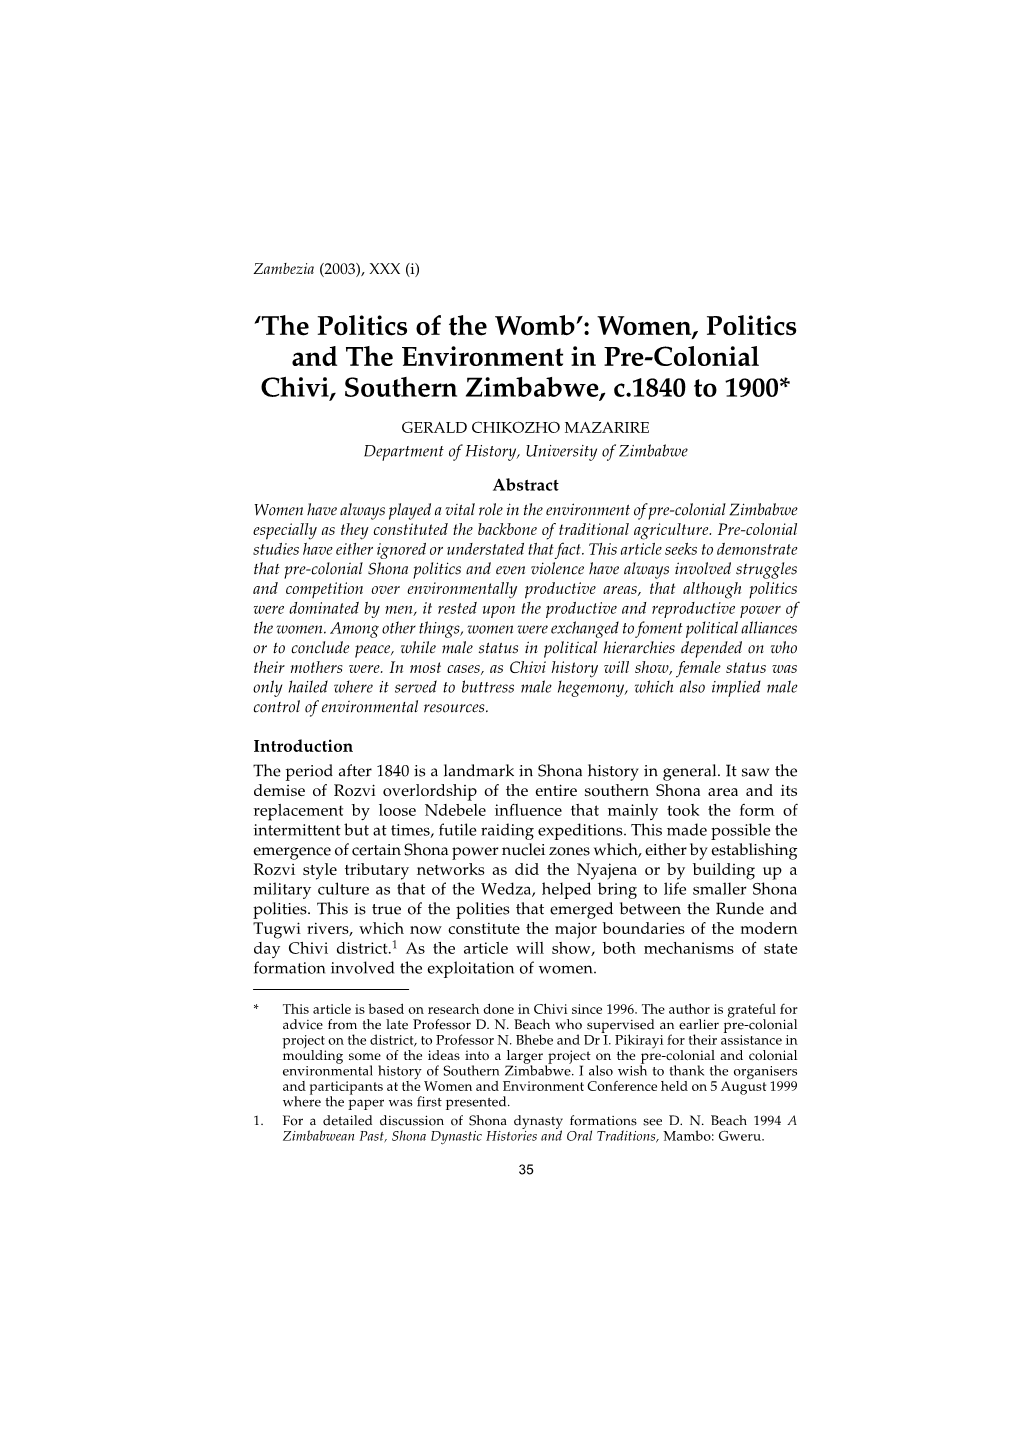 'The Politics of the Womb': Women, Politics and The